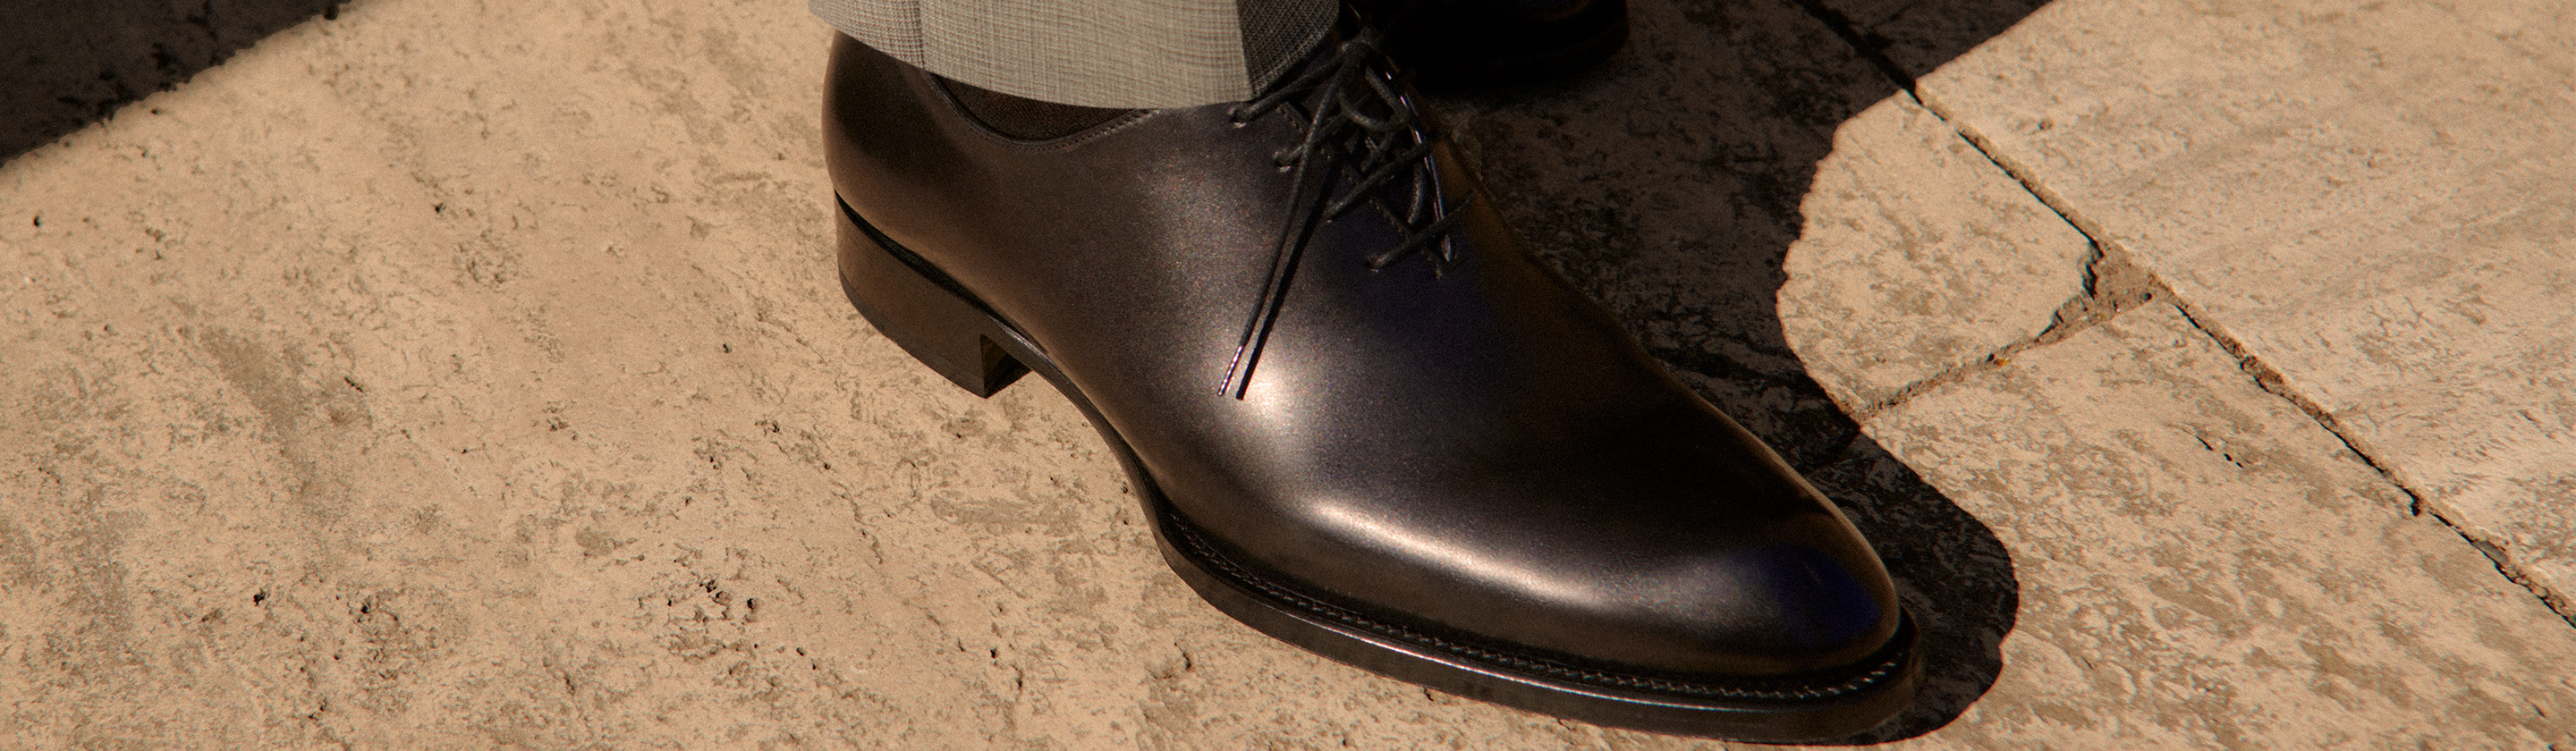 Oxford and Derbies | Brioni® US Official Store